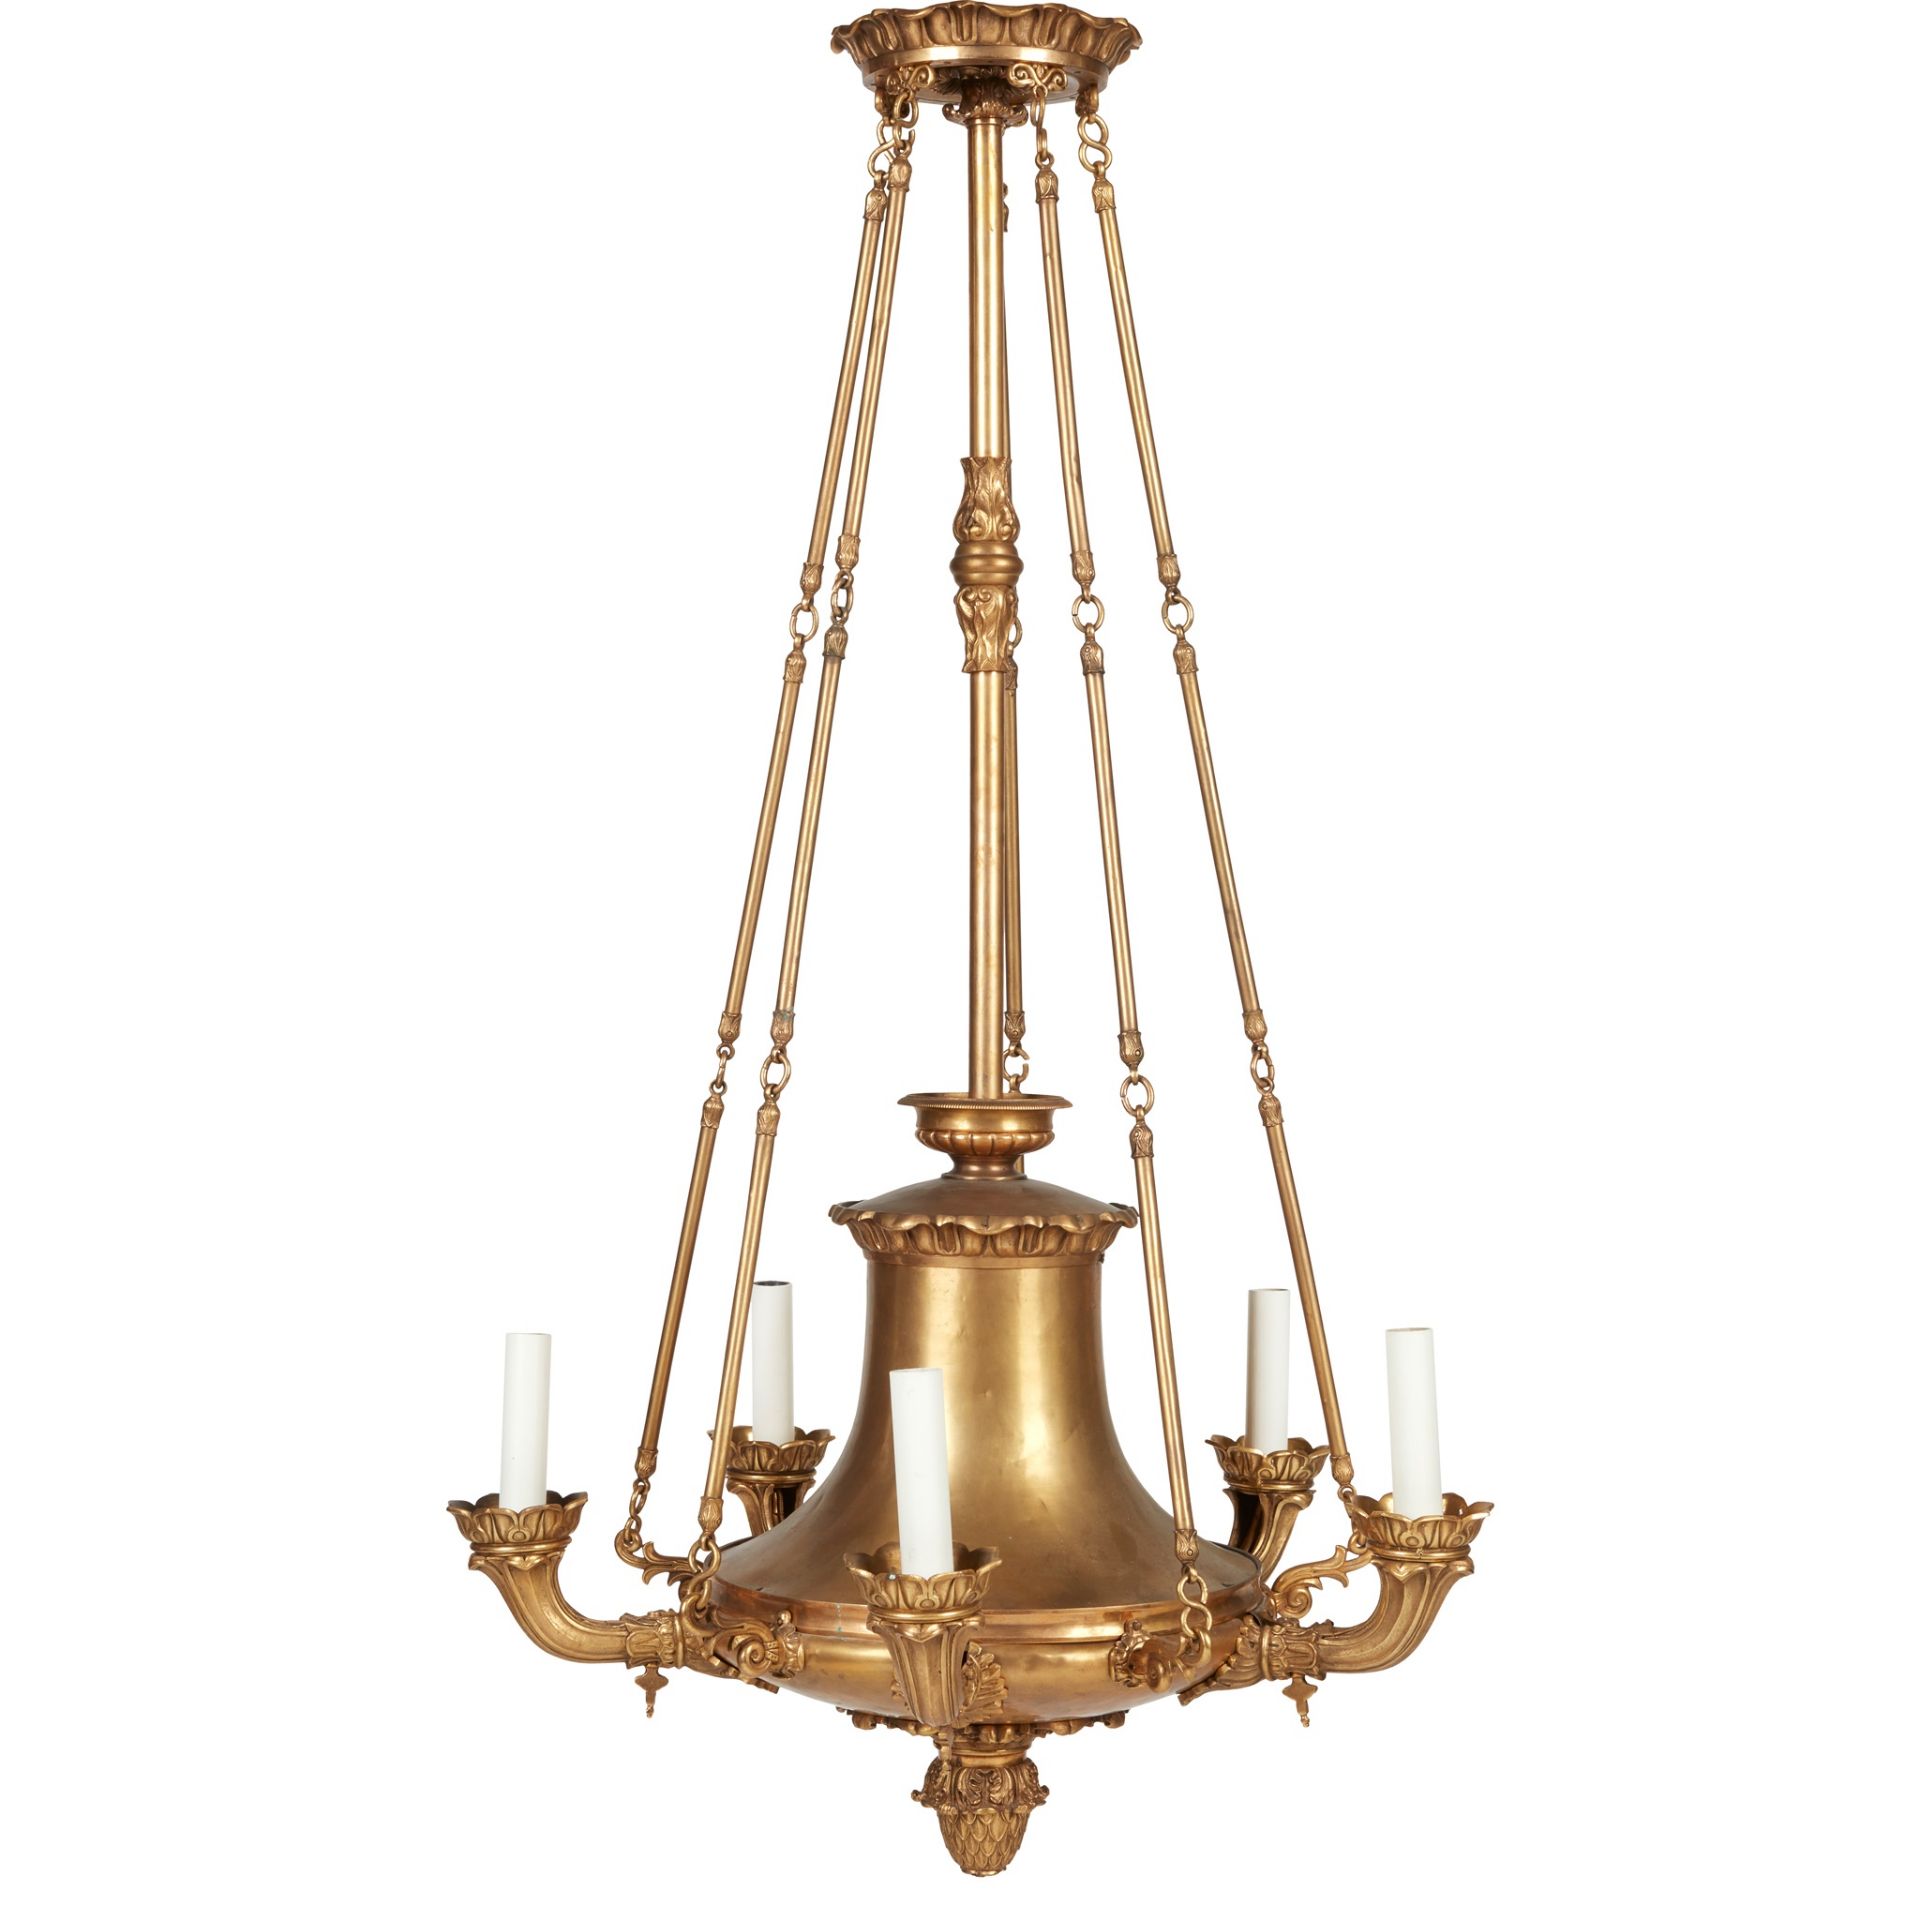 EMPIRE STYLE BRASS CHANDELIER LATE 19TH CENTURY